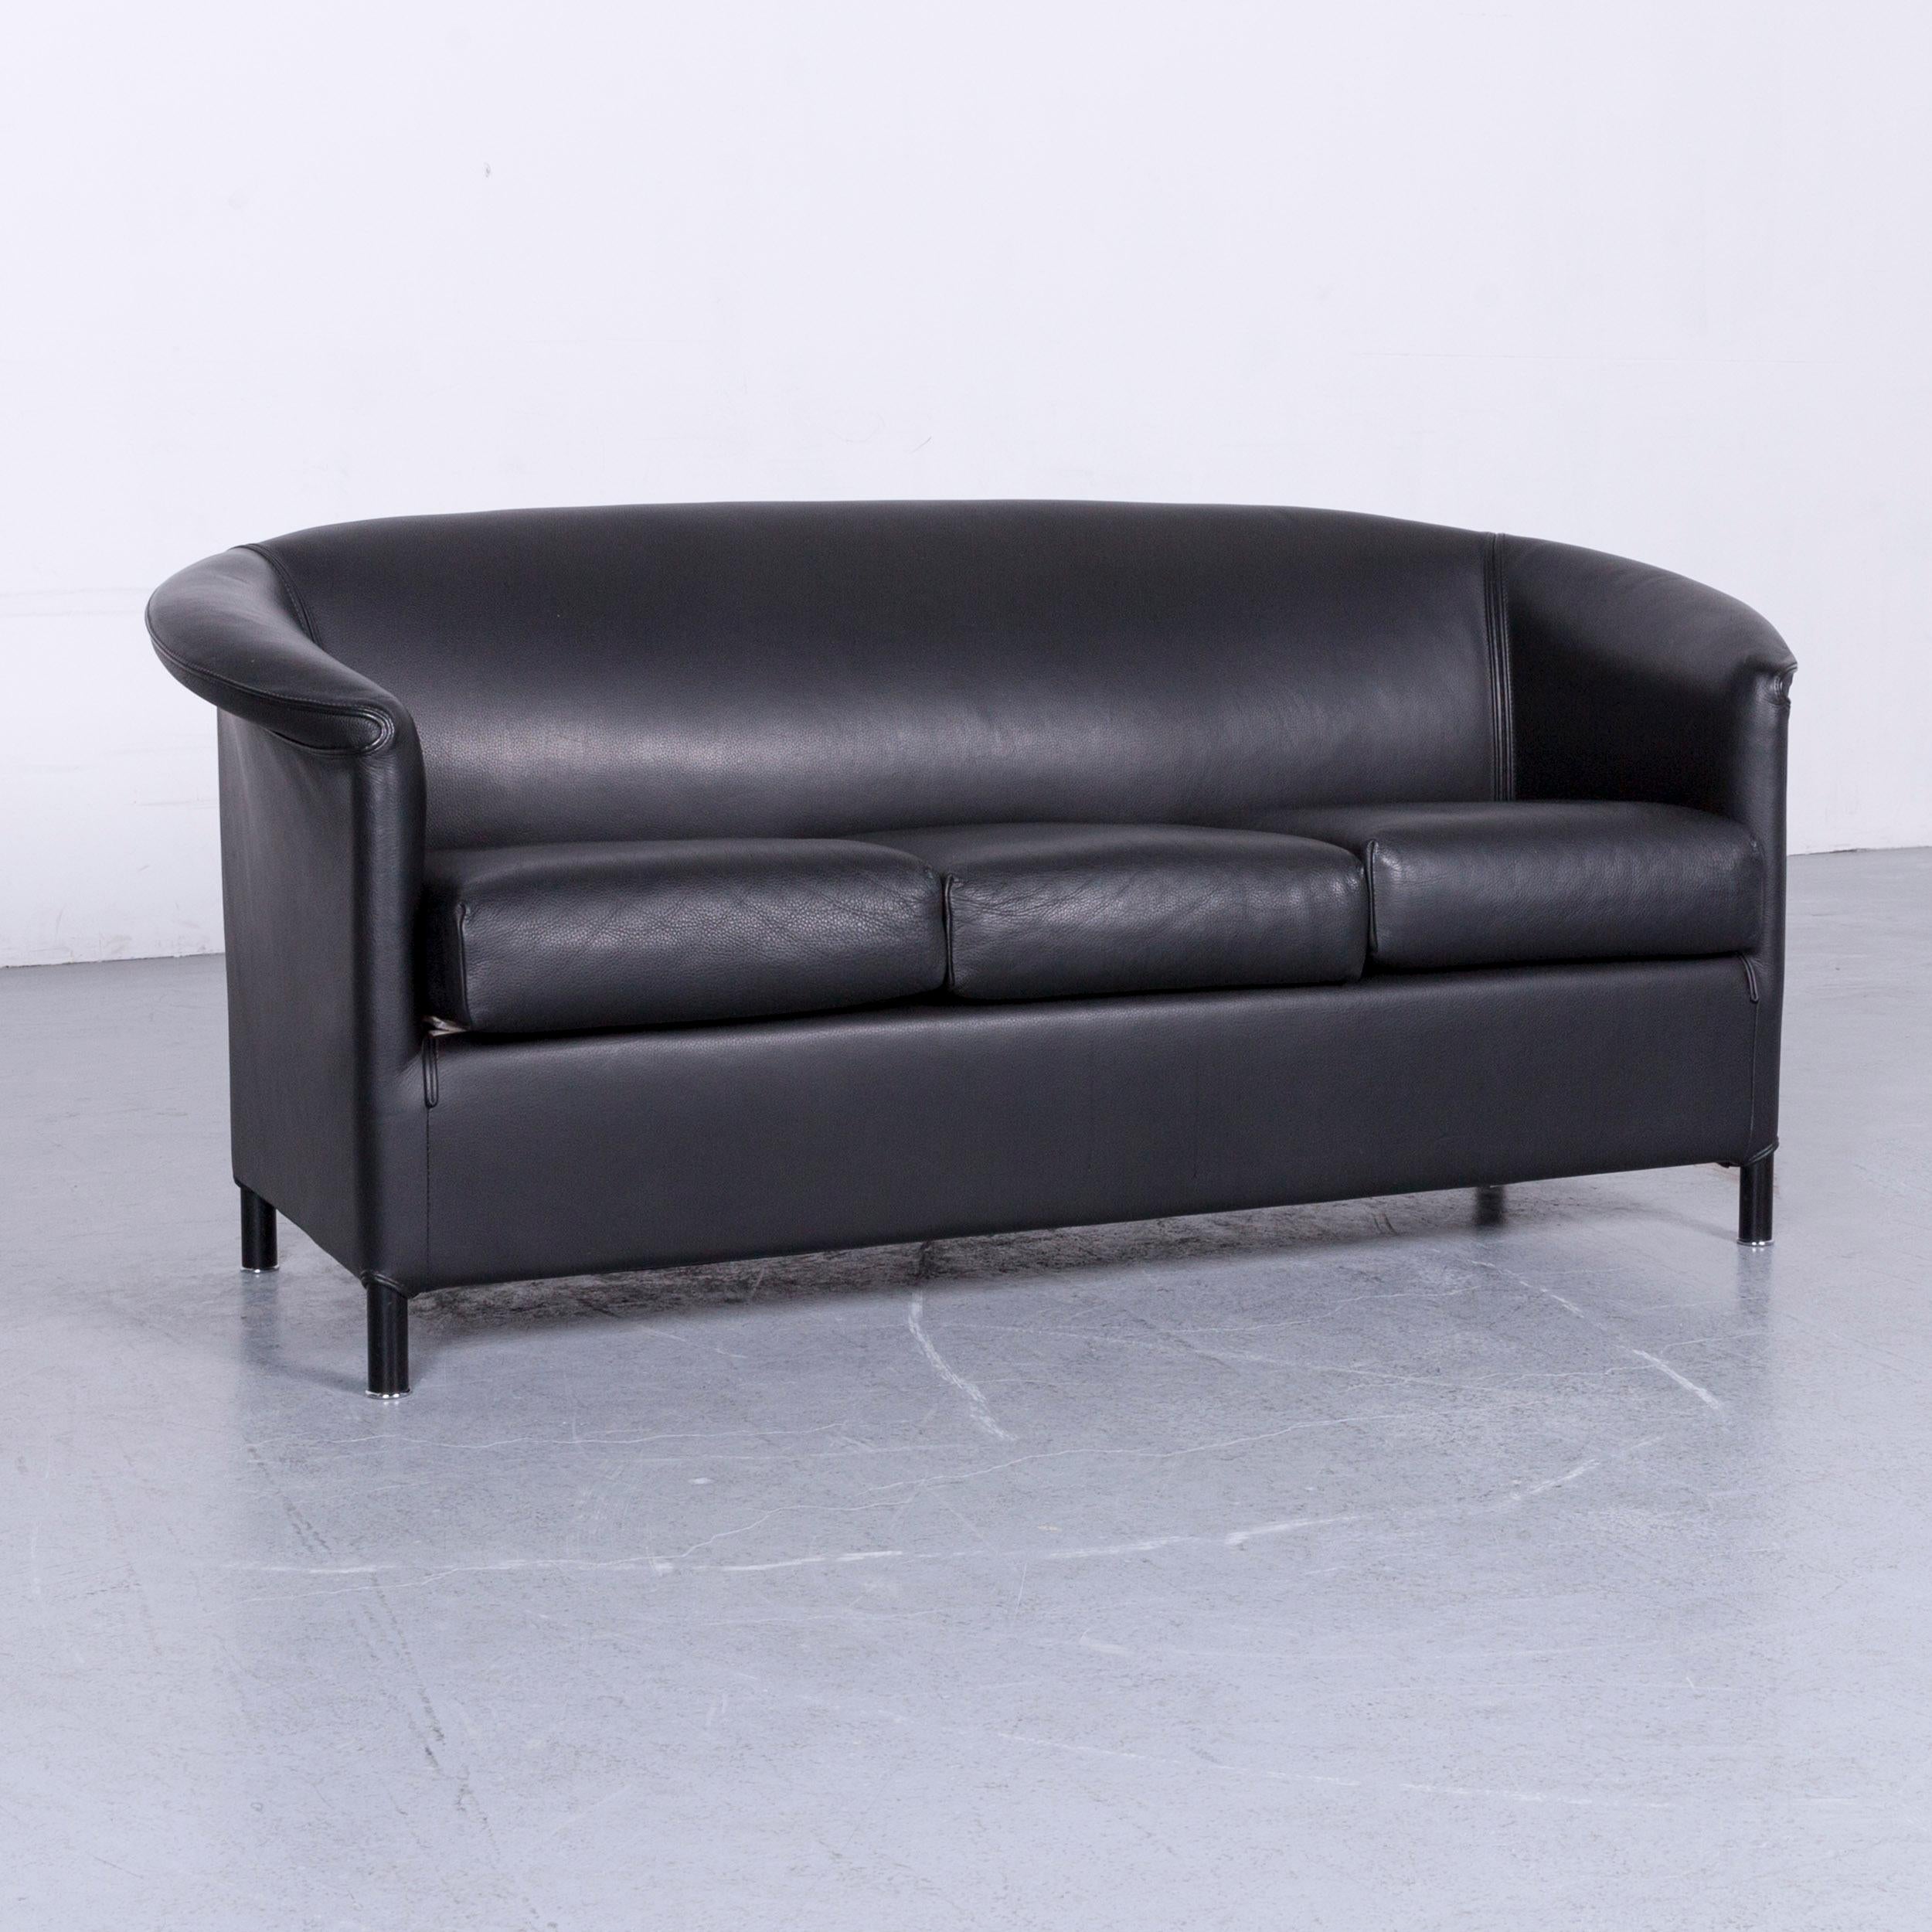 We bring to you an Wittmann Aura designer leather sofa black two-seat couch.